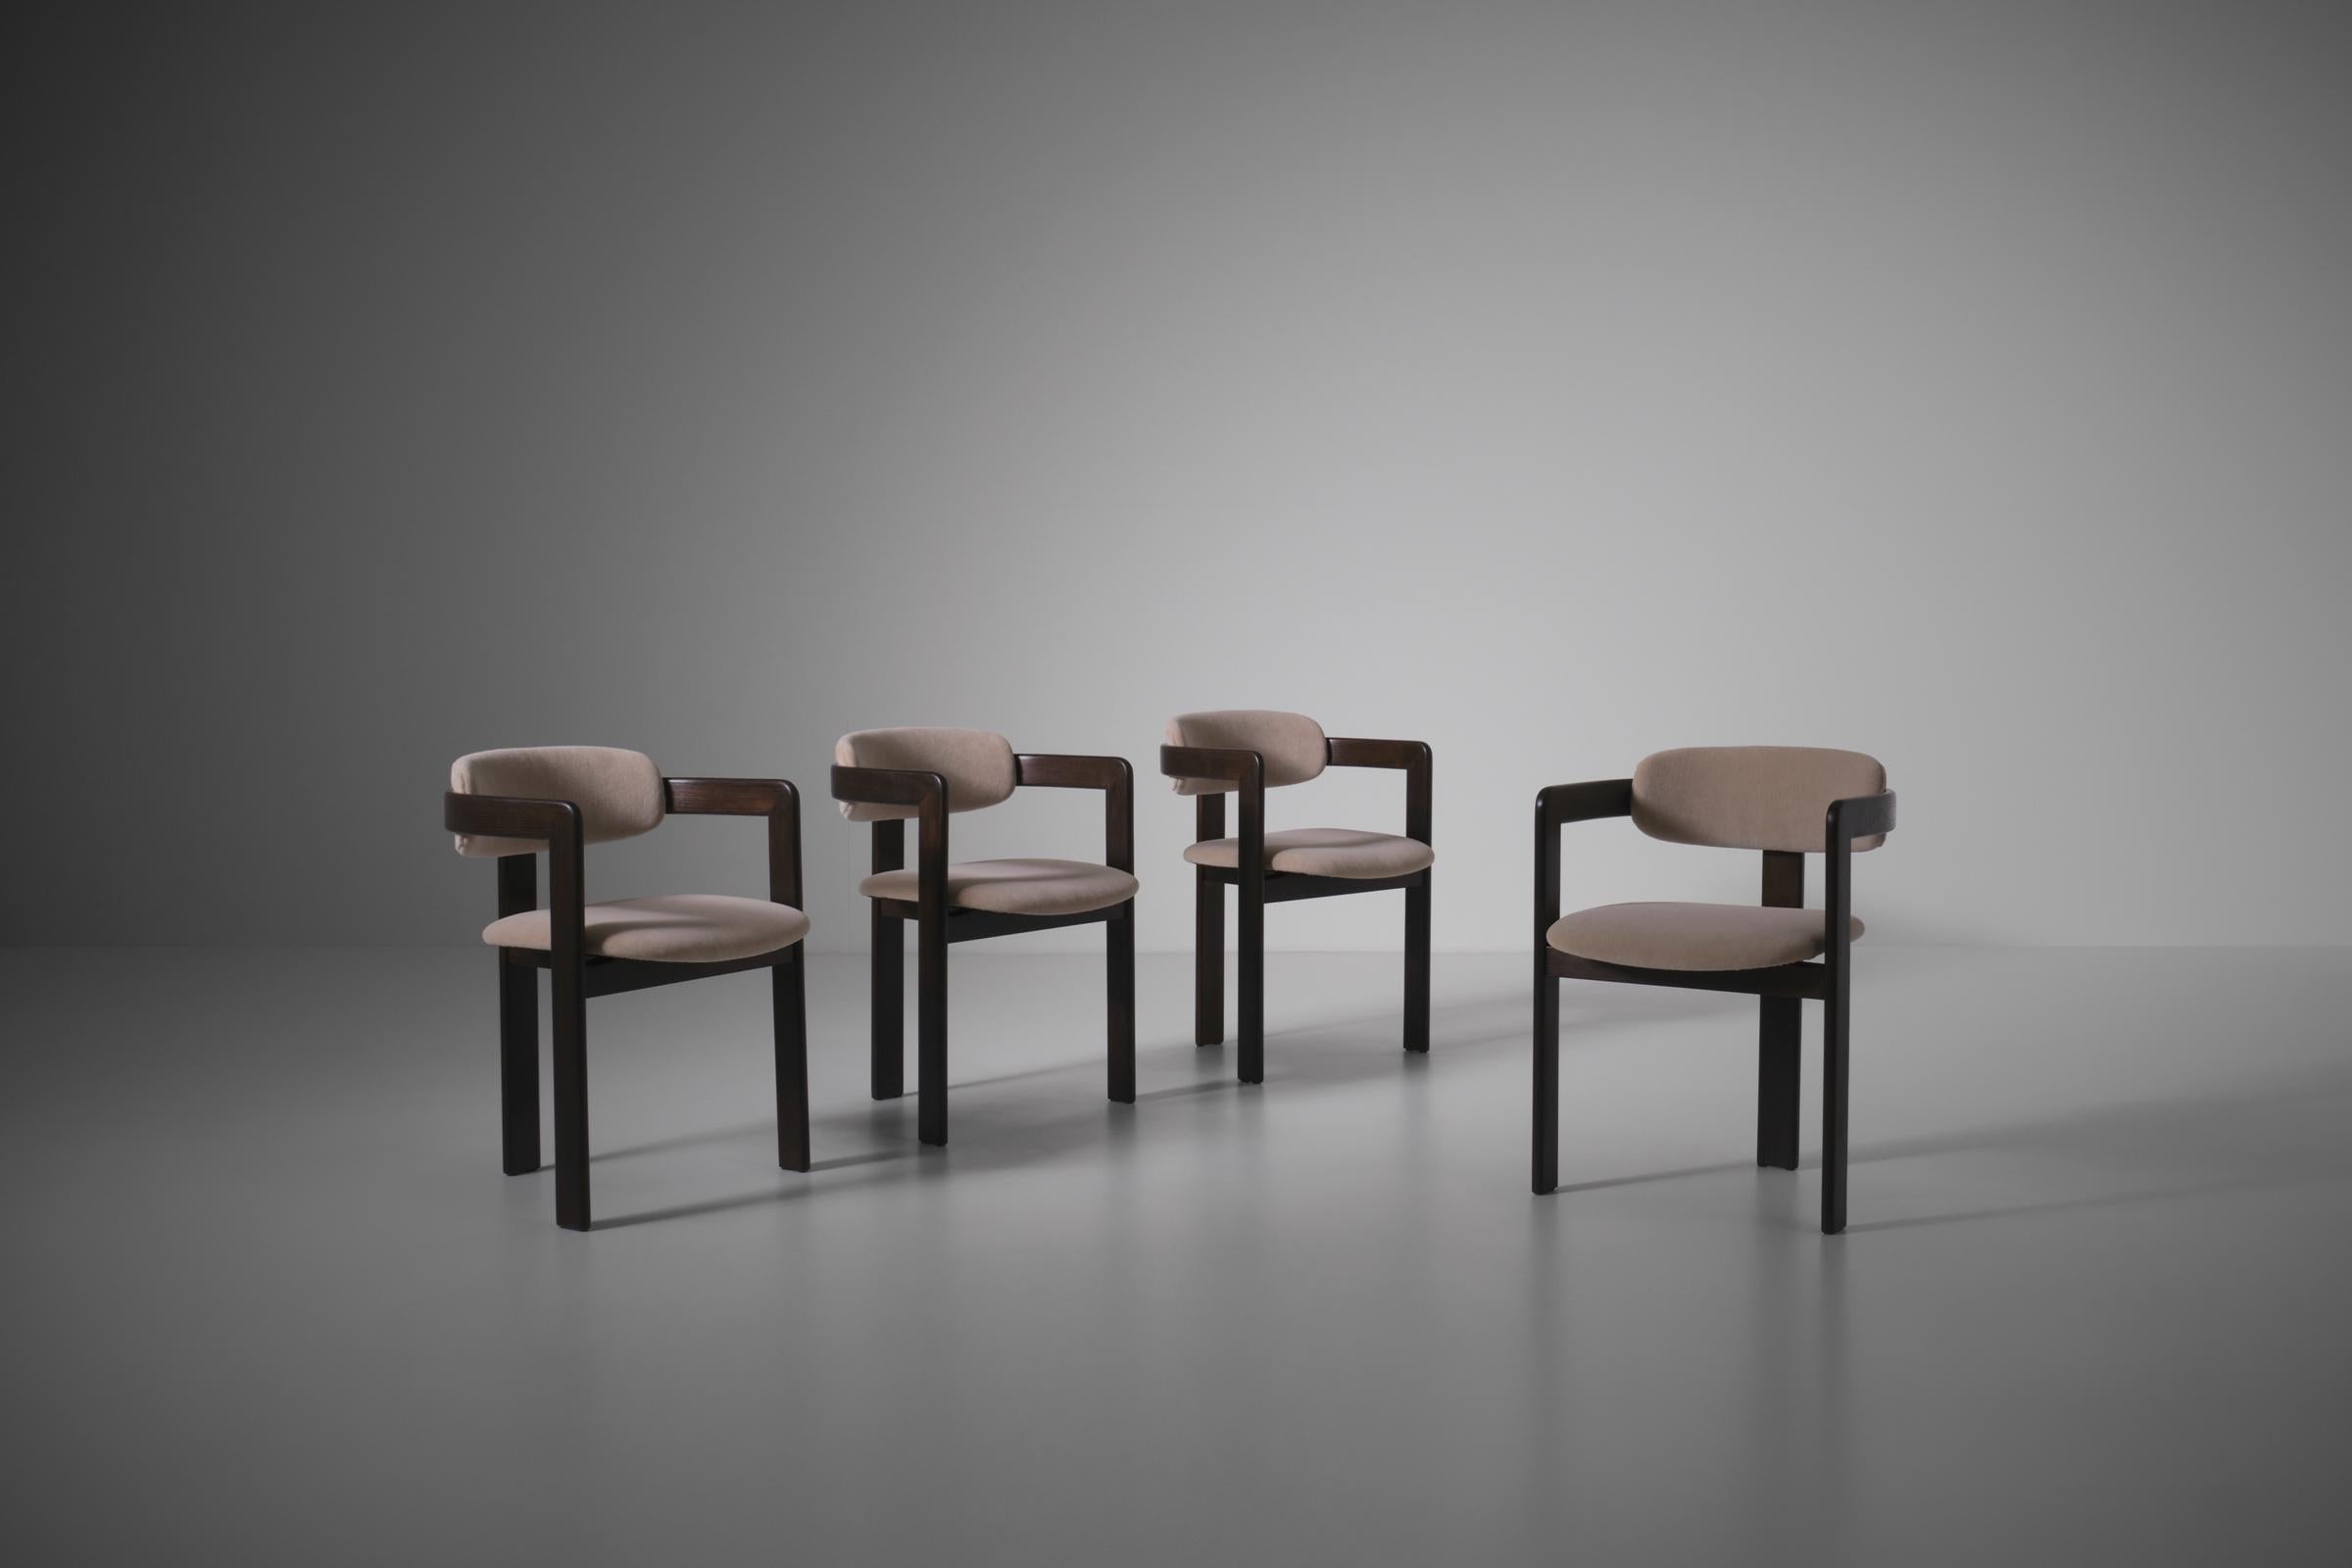 Set of four sculptural dining chairs, Italy 1970s. Beautiful bentwood frames in dark stained ash with a nice contrasting sand colored velvet mohair. The chairs have a strong sculptural design with beautiful details, reminiscent of the Pamplona